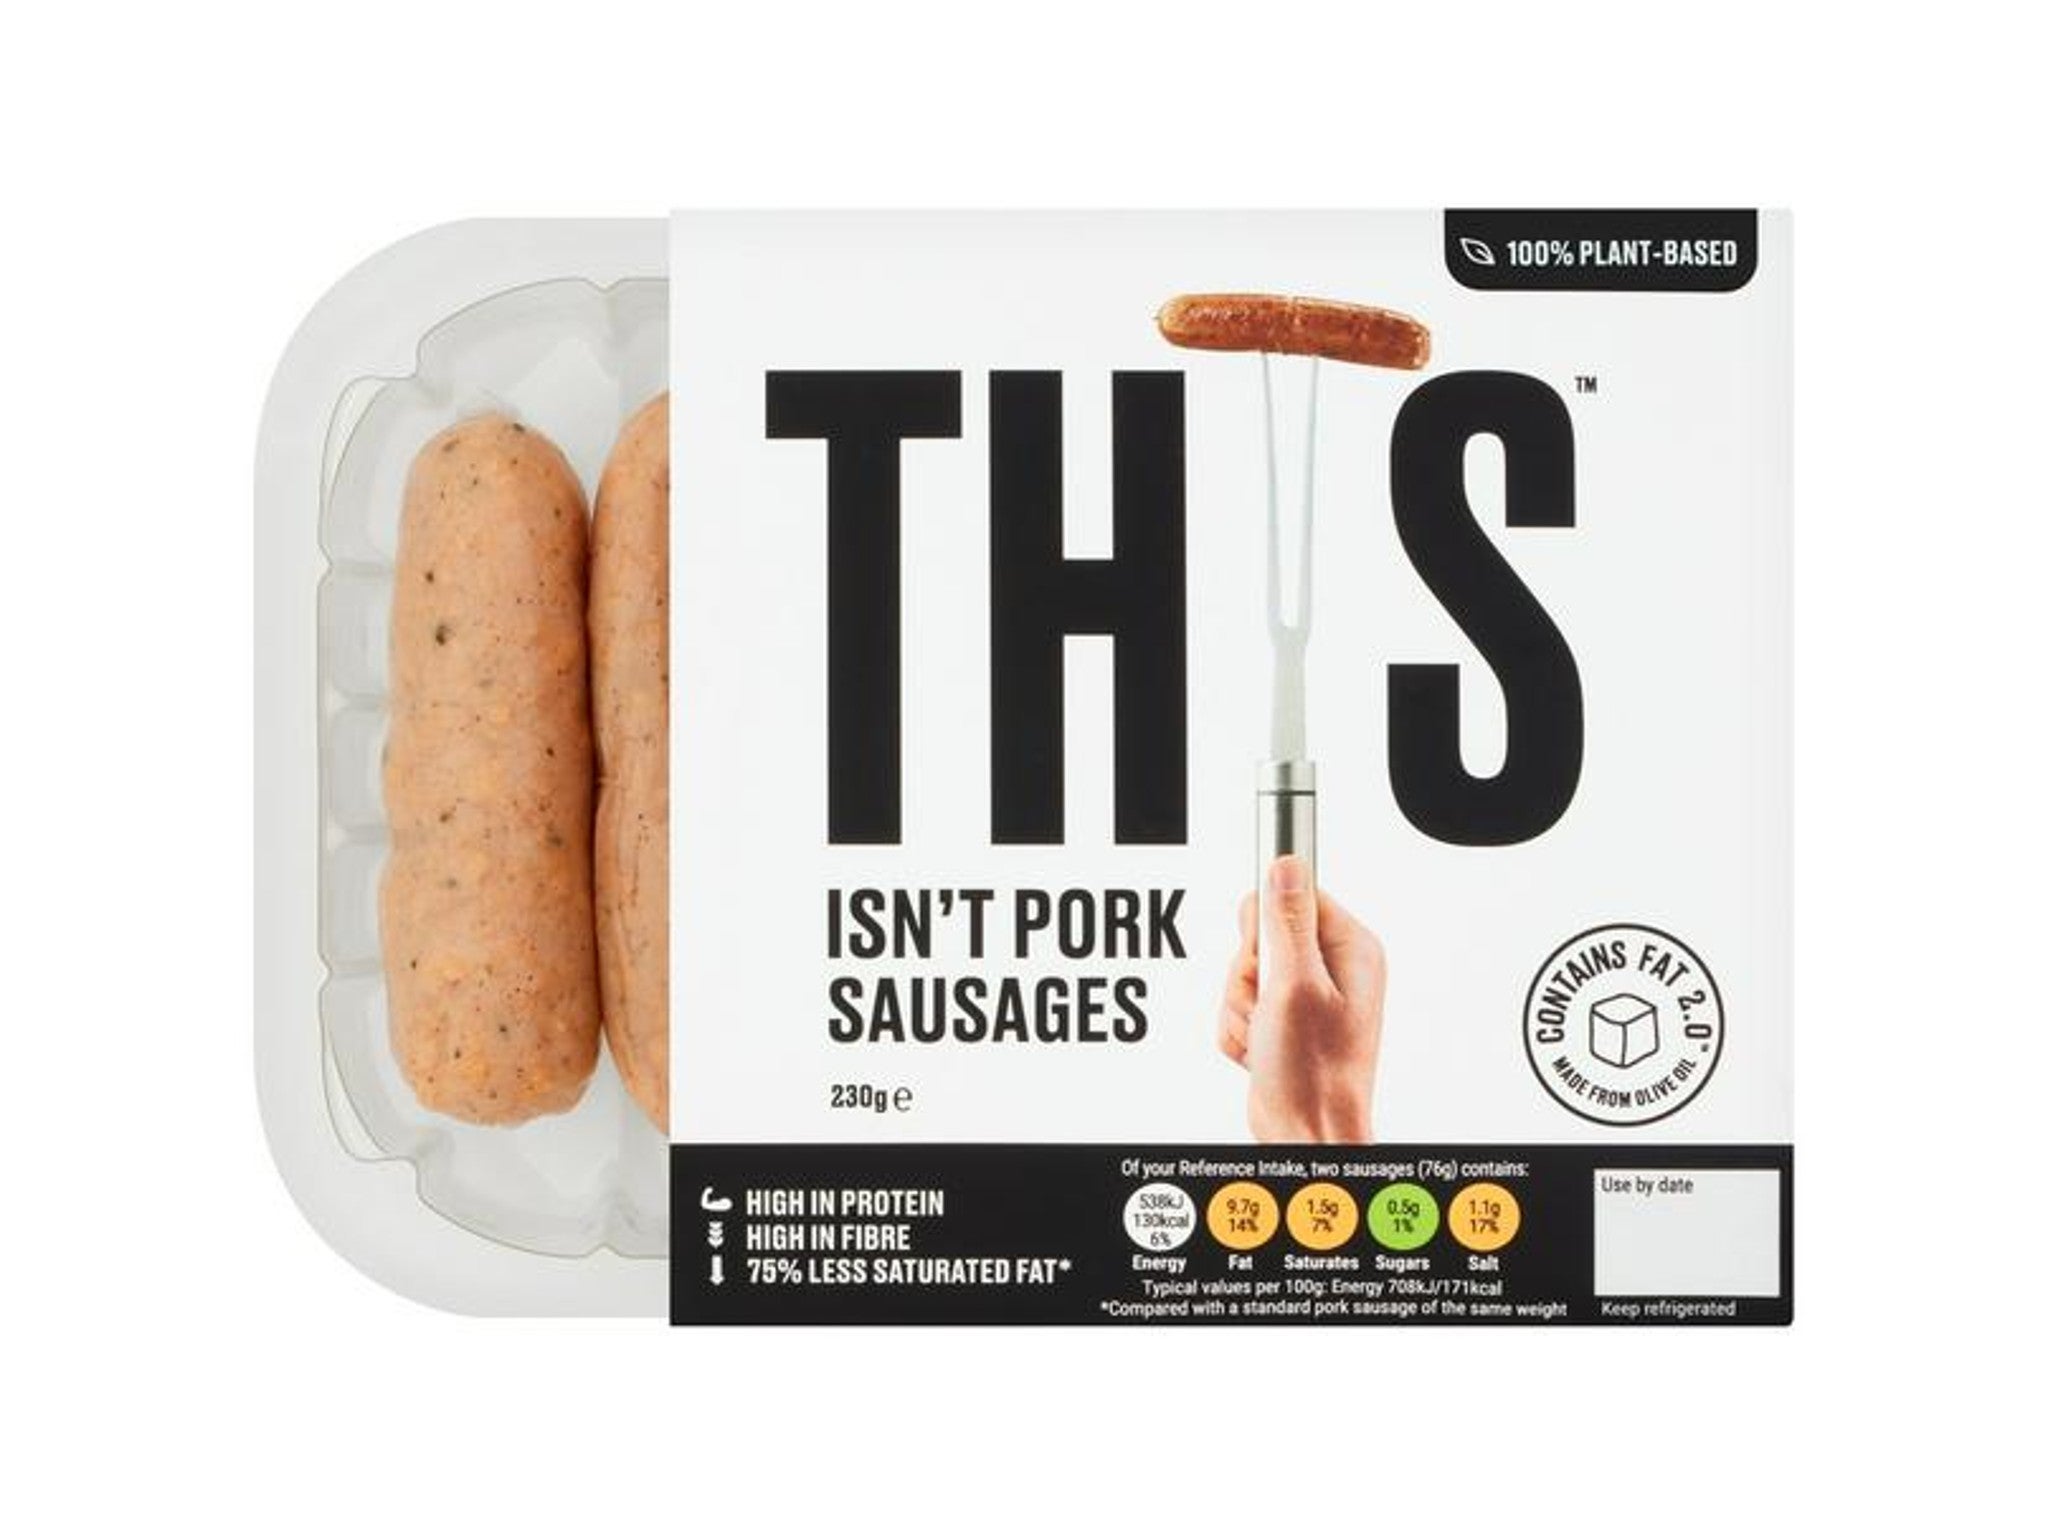 This isn't pork plant-based sausages